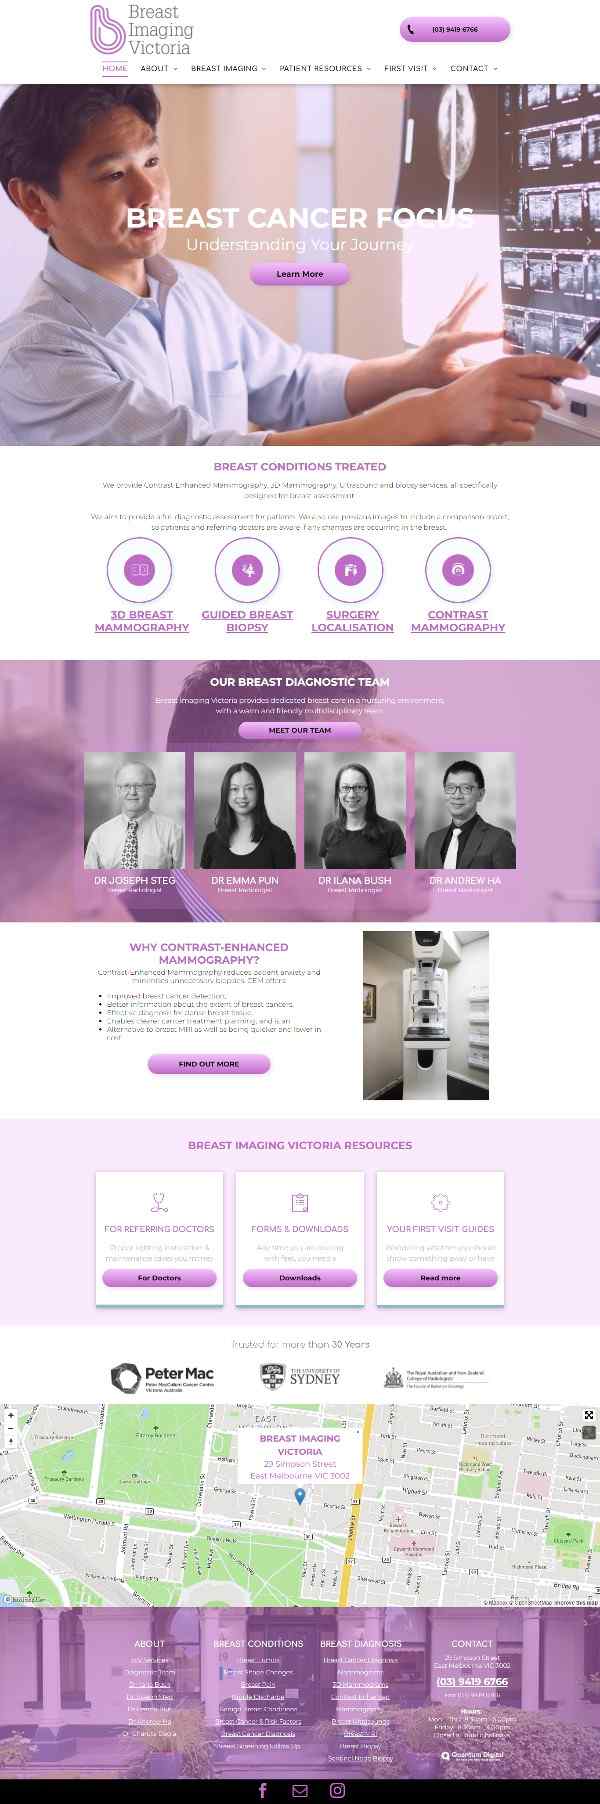 About Breast Imaging Victoria